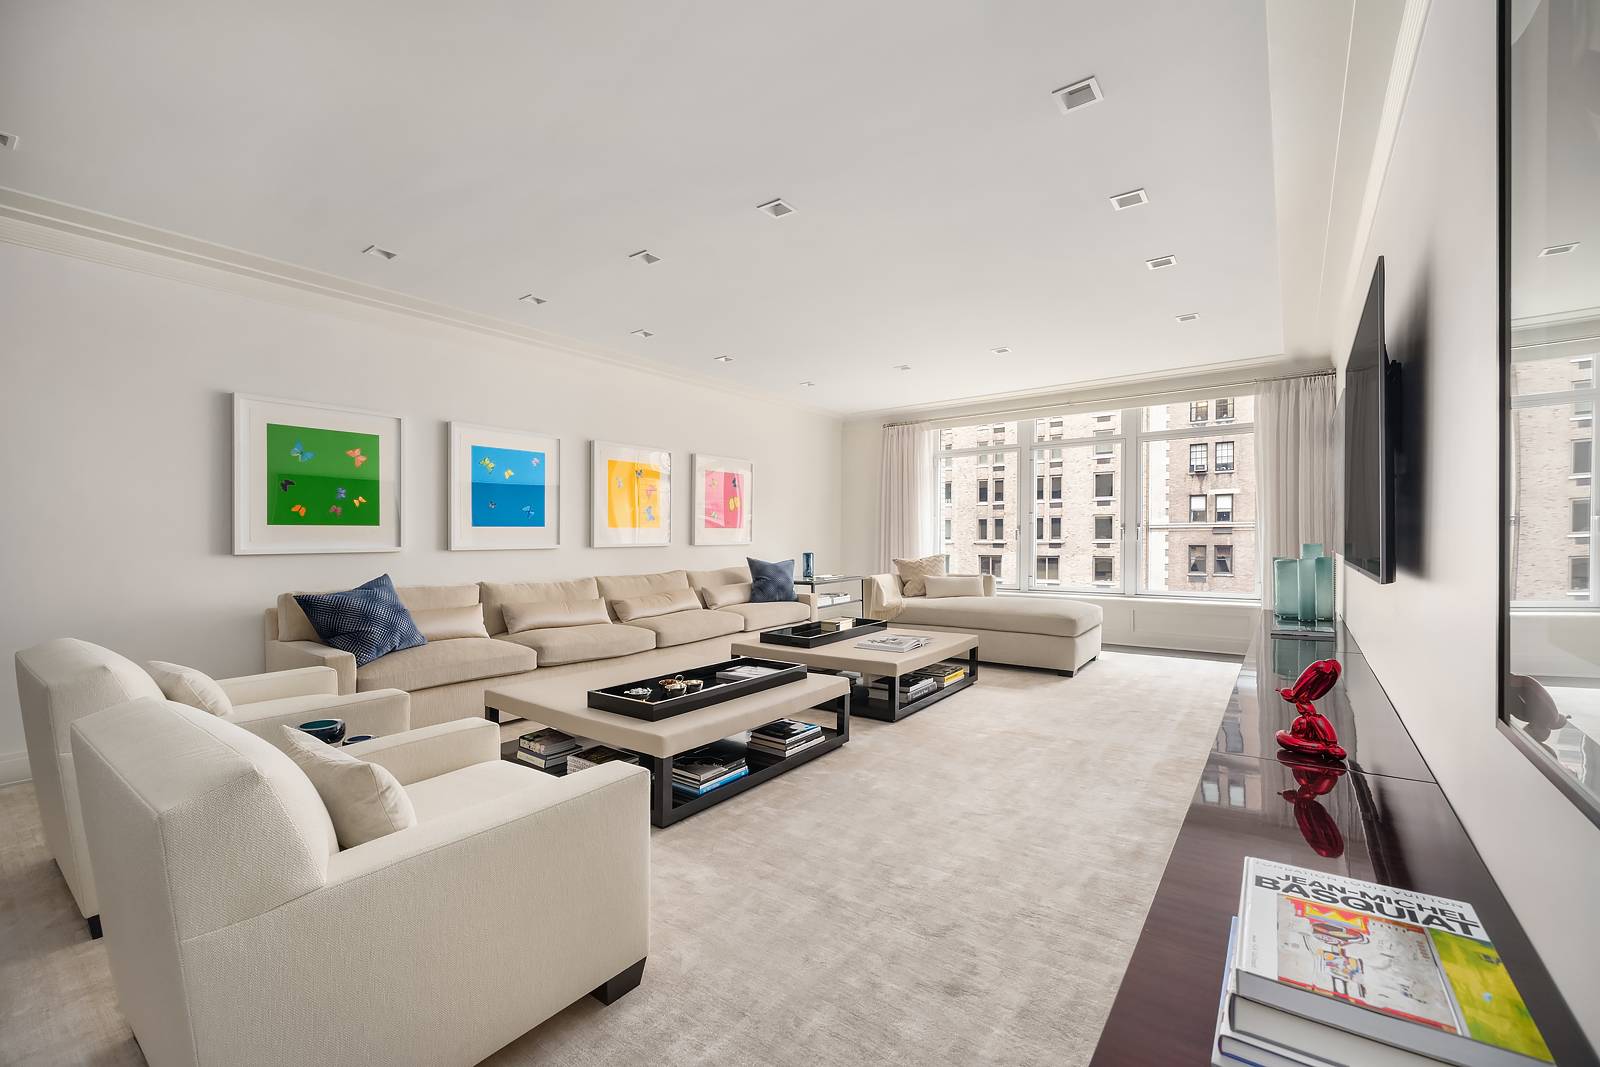 Occupying one of the city's most coveted addresses on Park Avenue, this stunning, approximate 2, 200 square foot, 2 bedroom, 2.